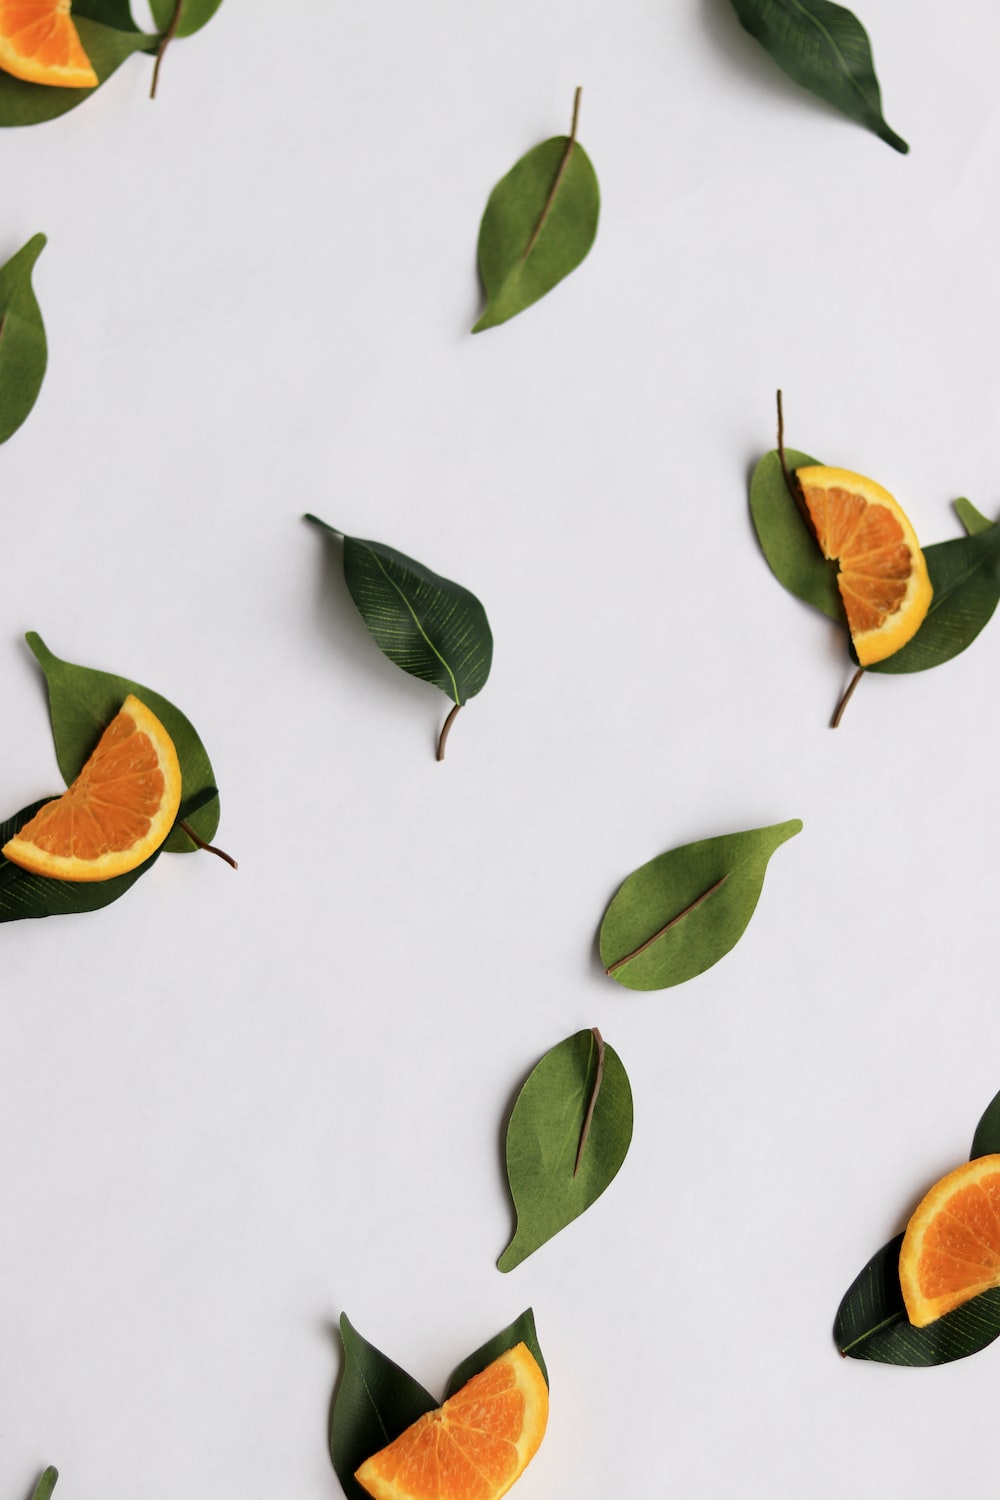 Orange slices and green leaves arranged on a white surface. - Fruit